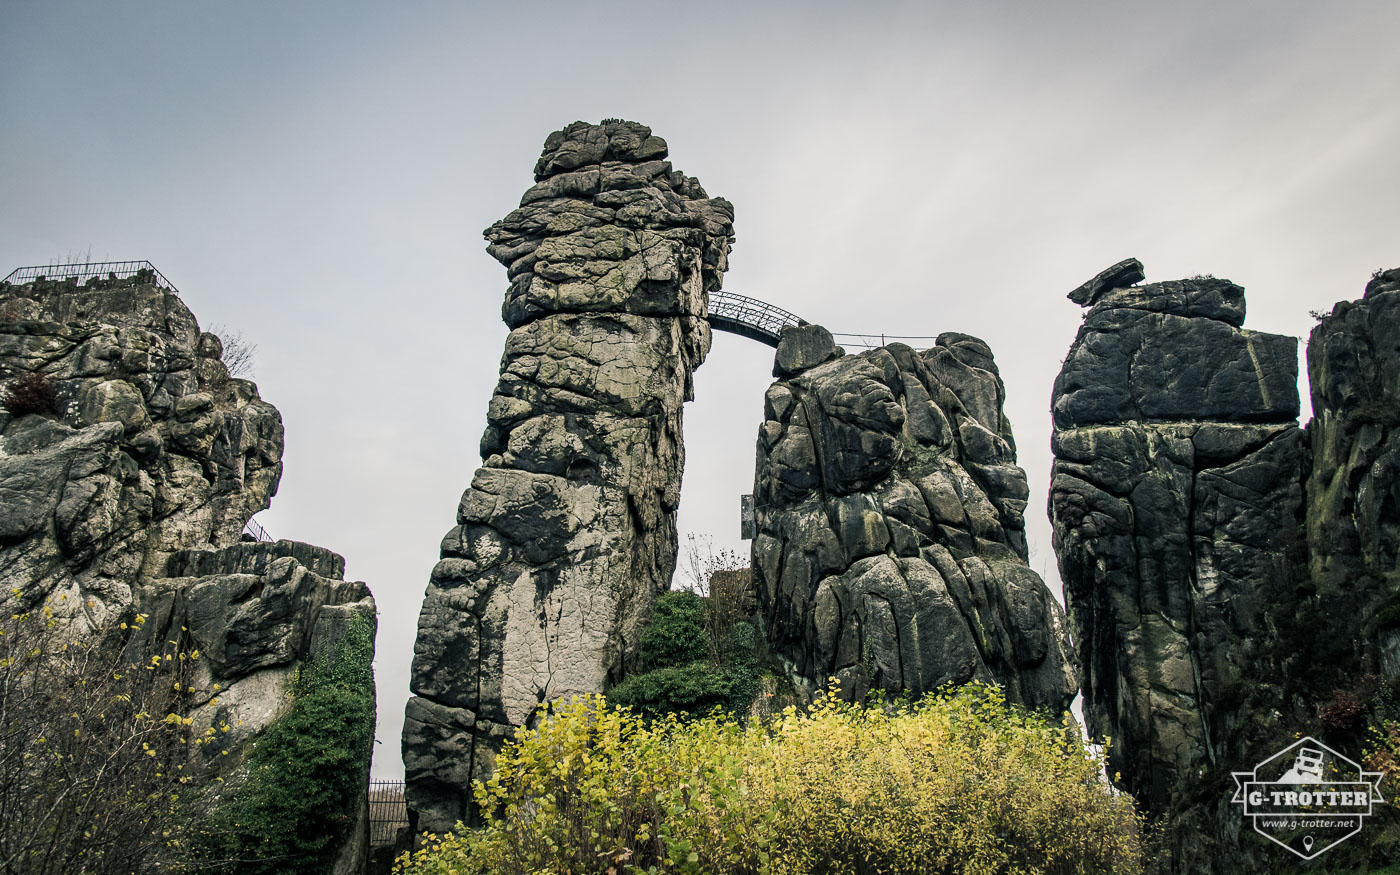 The Externsteine are a distinctive sandstone rock formation located in the Teutoburg Forest.